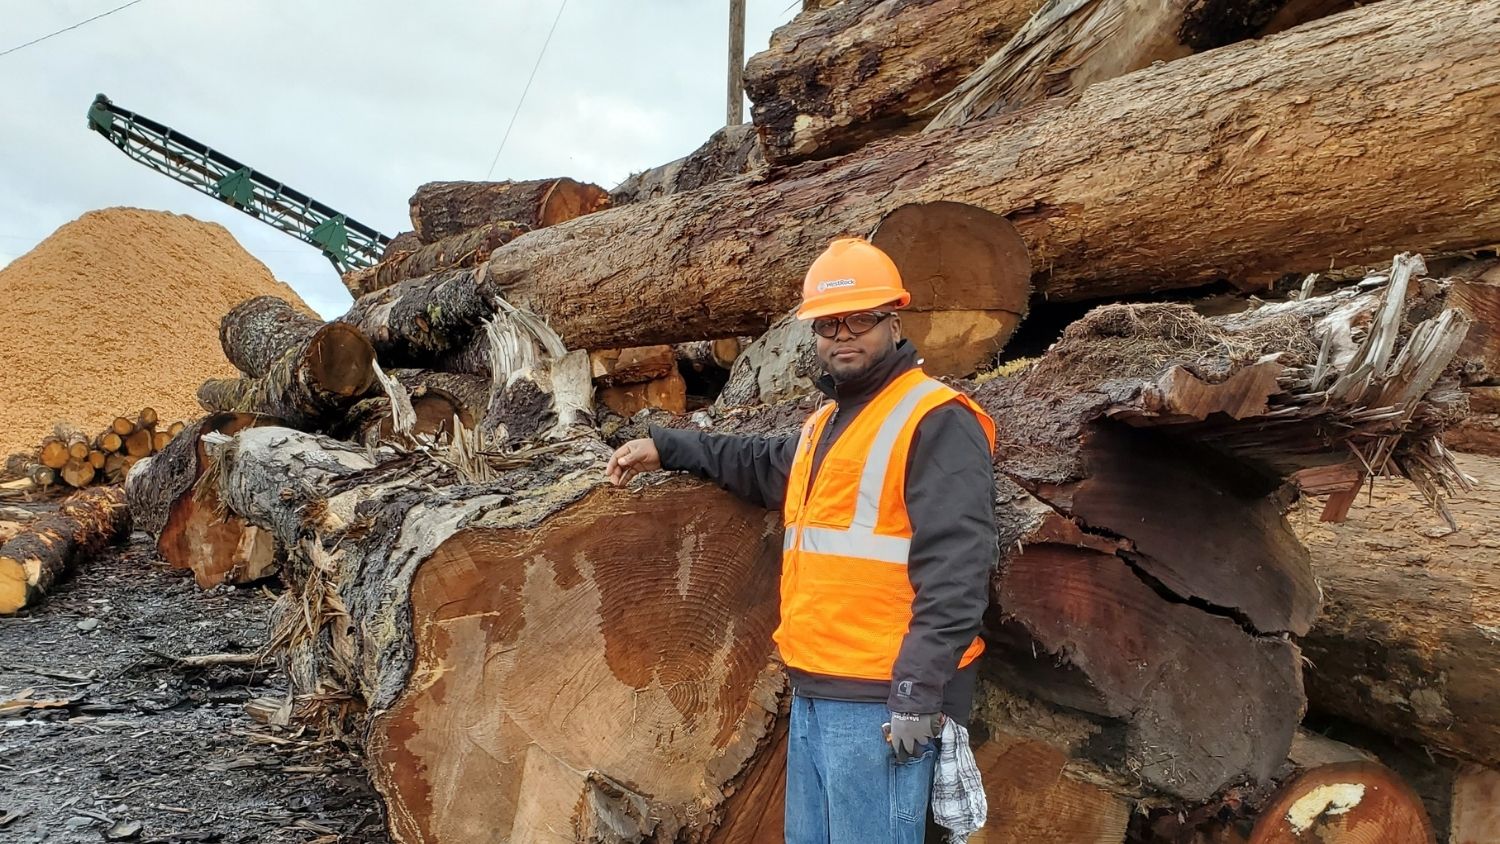 Elijah Gore stands in a hard hat in front of large logs